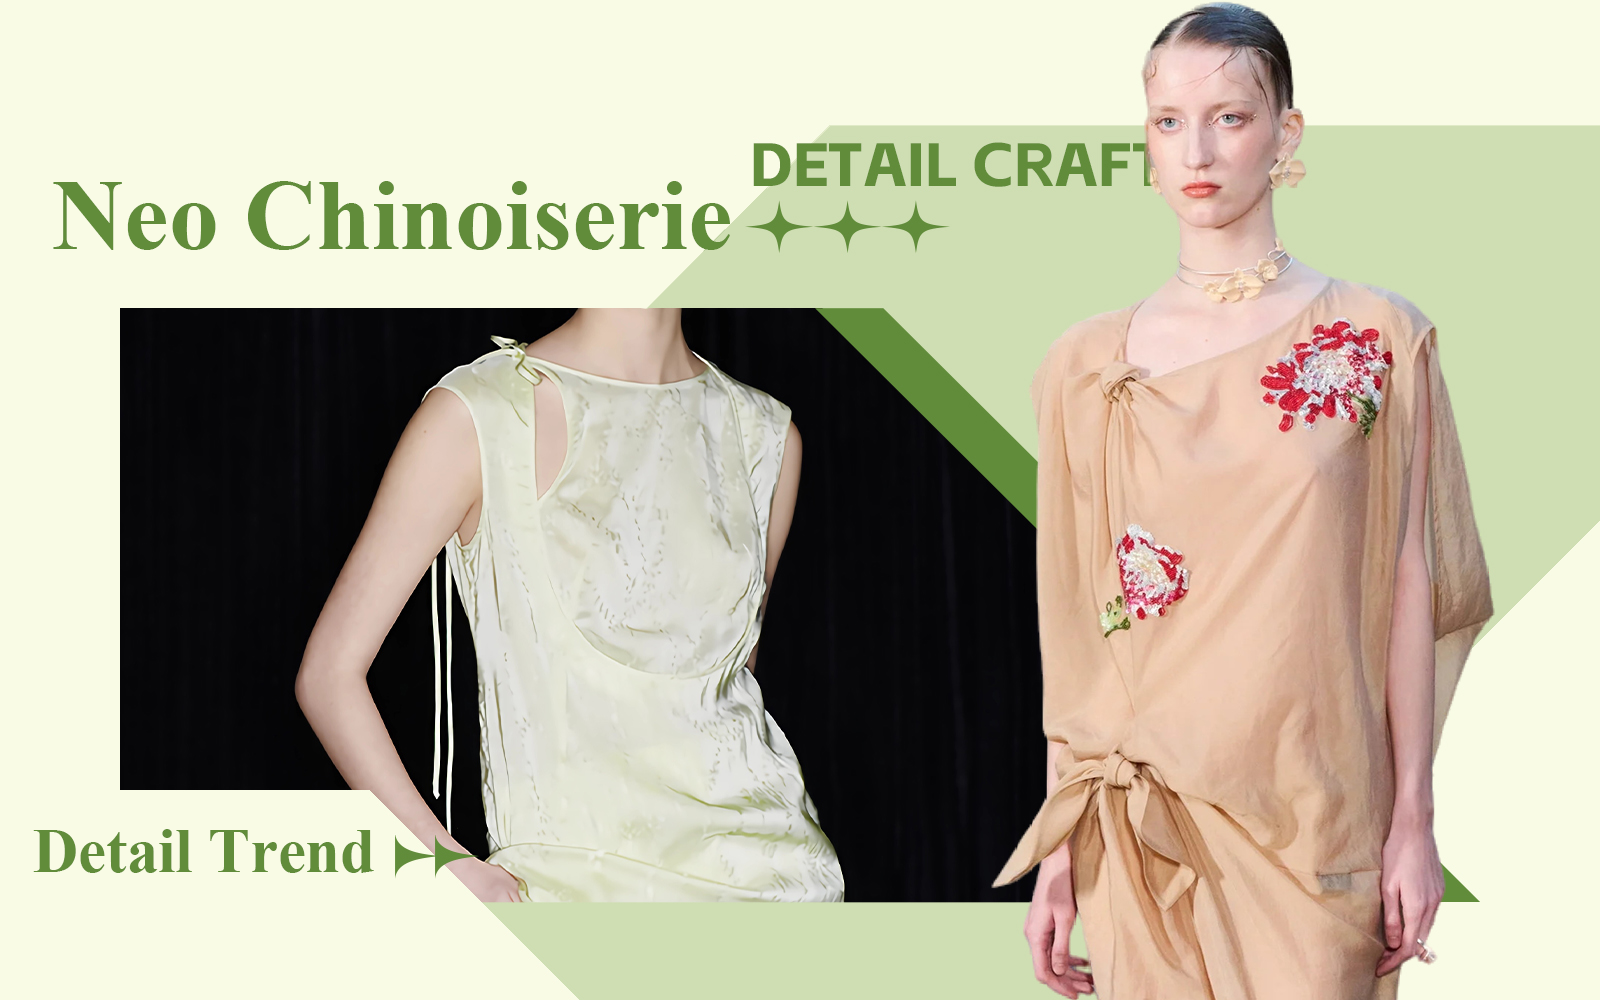 Neo Chinoiserie -- The Detail & Craft Trend for Womenswear